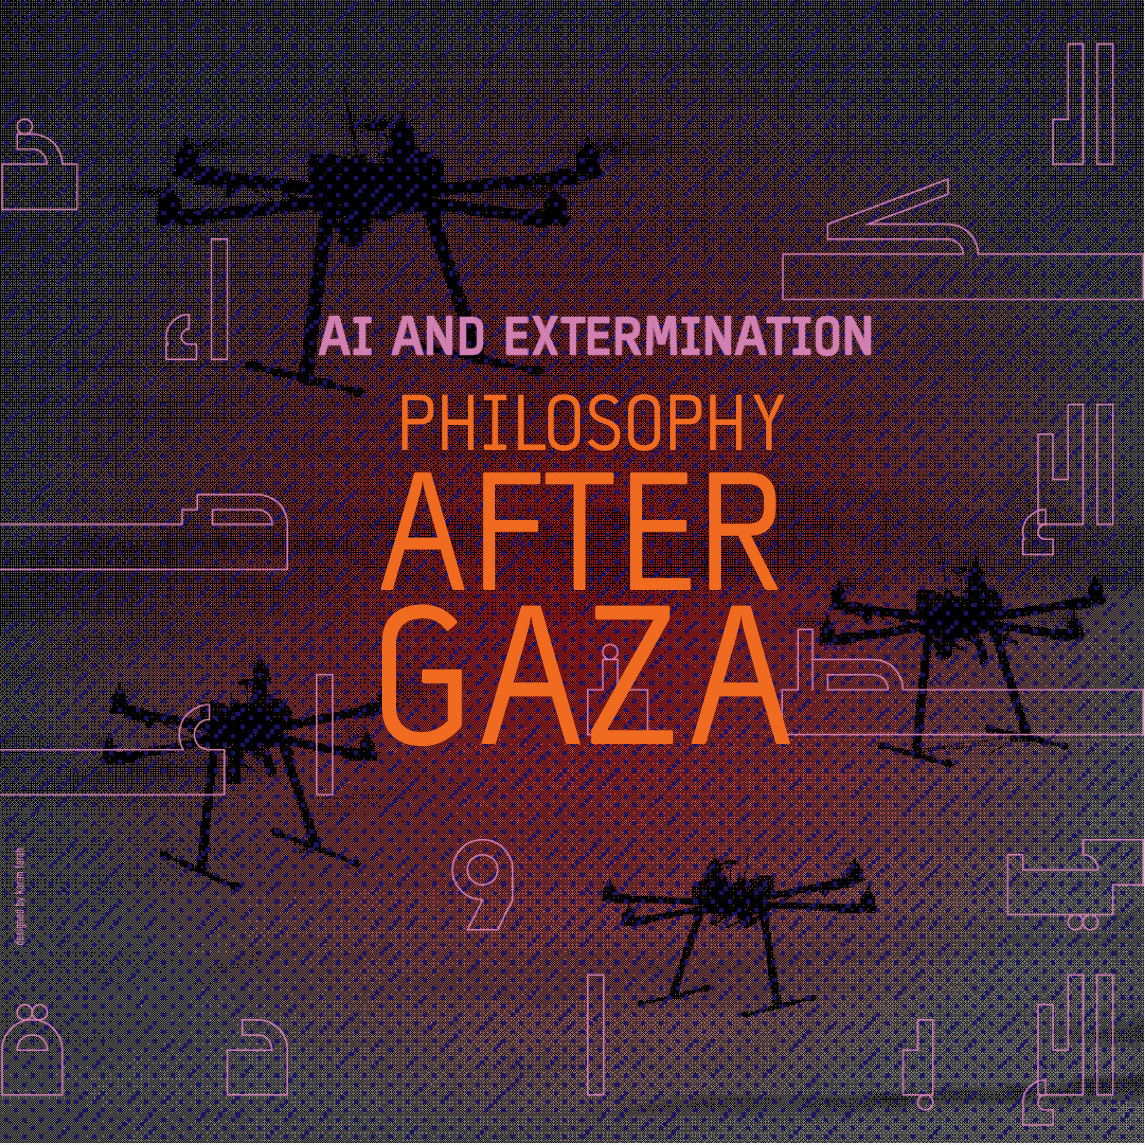 AI and Extermination: Philosophy After Gaza TODAY 5 pm Live form Beirut, April 16 Barzakh & online (hybrid event). As Adorno wrote: 'To write poetry after Auschwitz is barbaric.' Given the rise of AI drone-enabled warfare: what does it mean to do philosophy after Gaza?